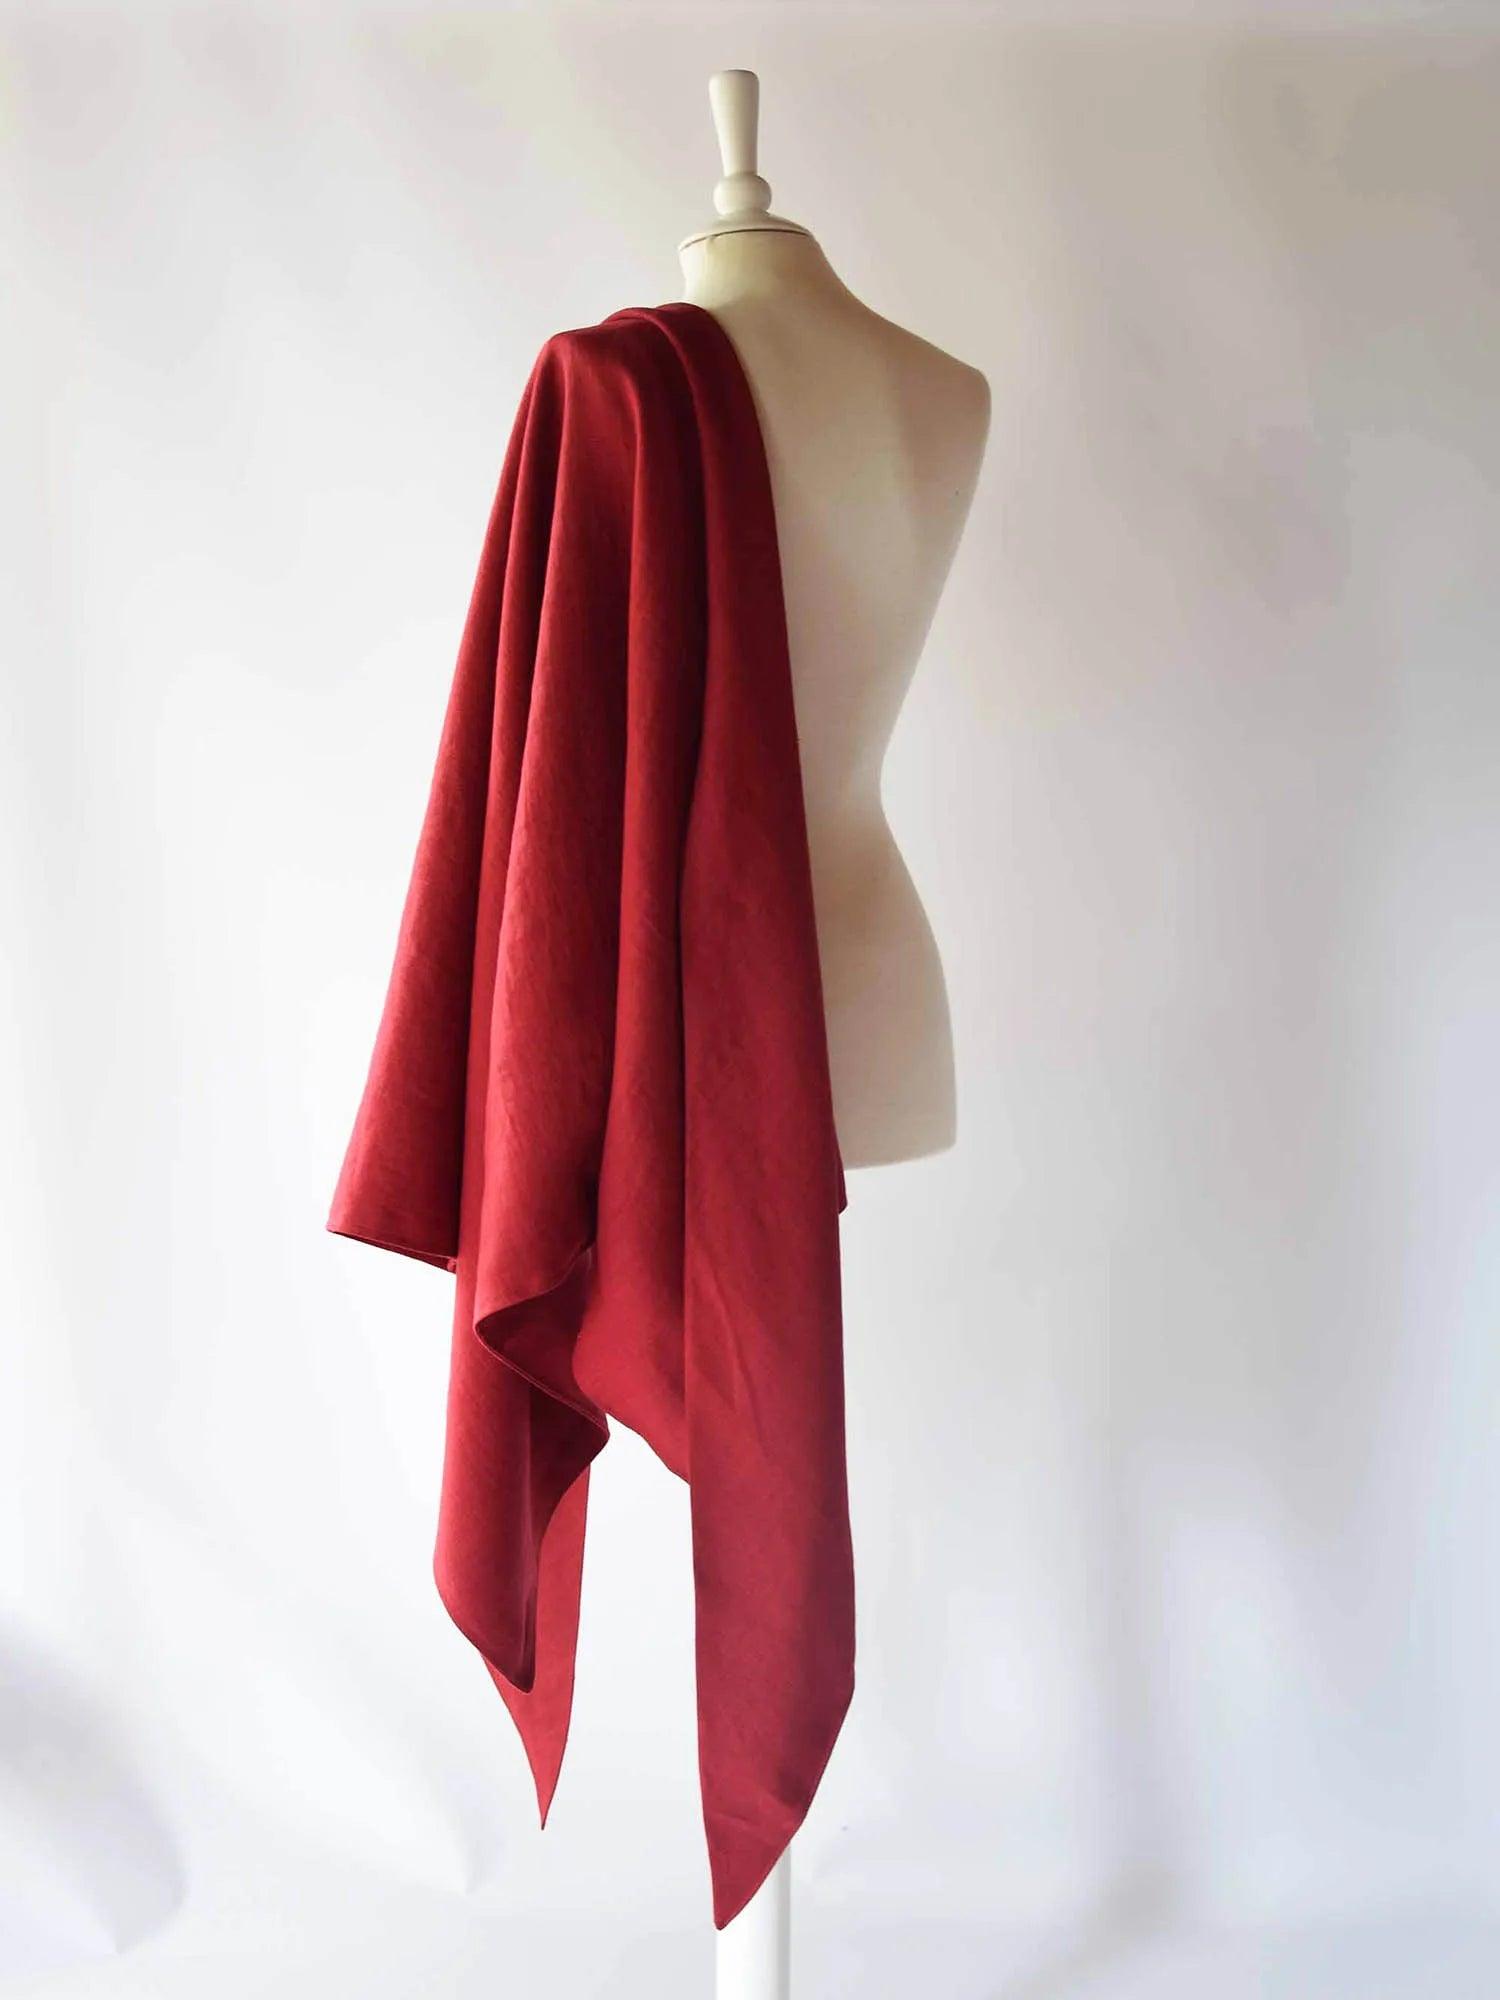 Large Linen Shawl in Cherry Red Linen - Atelier Serraspina